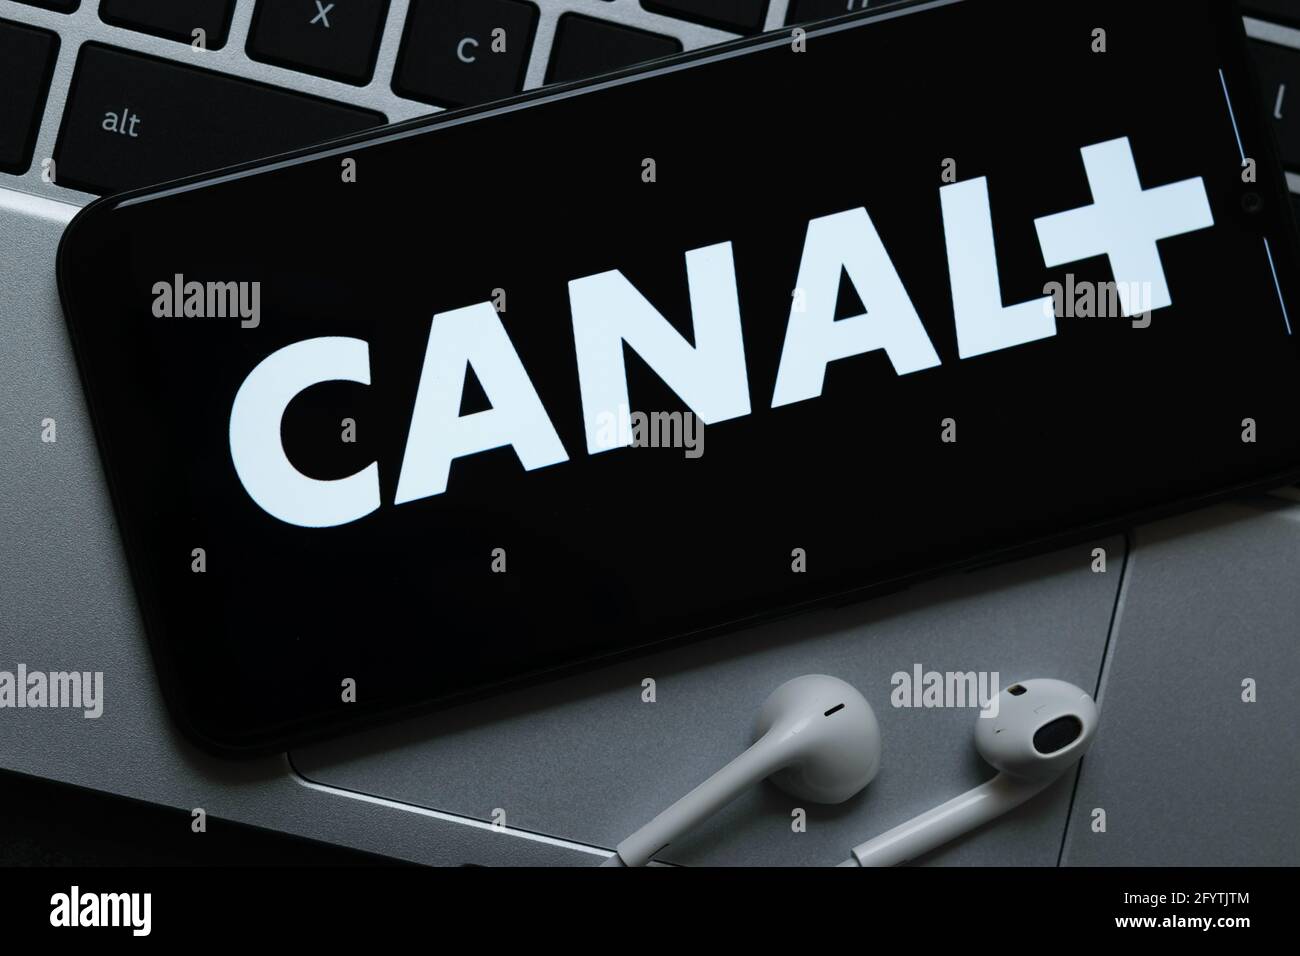 Krakow, Poland - October 07, 2020: Canal+ (Plus) application sign on the smartphone screen. Canal+ is a famous provider of Internet streaming  service Stock Photo